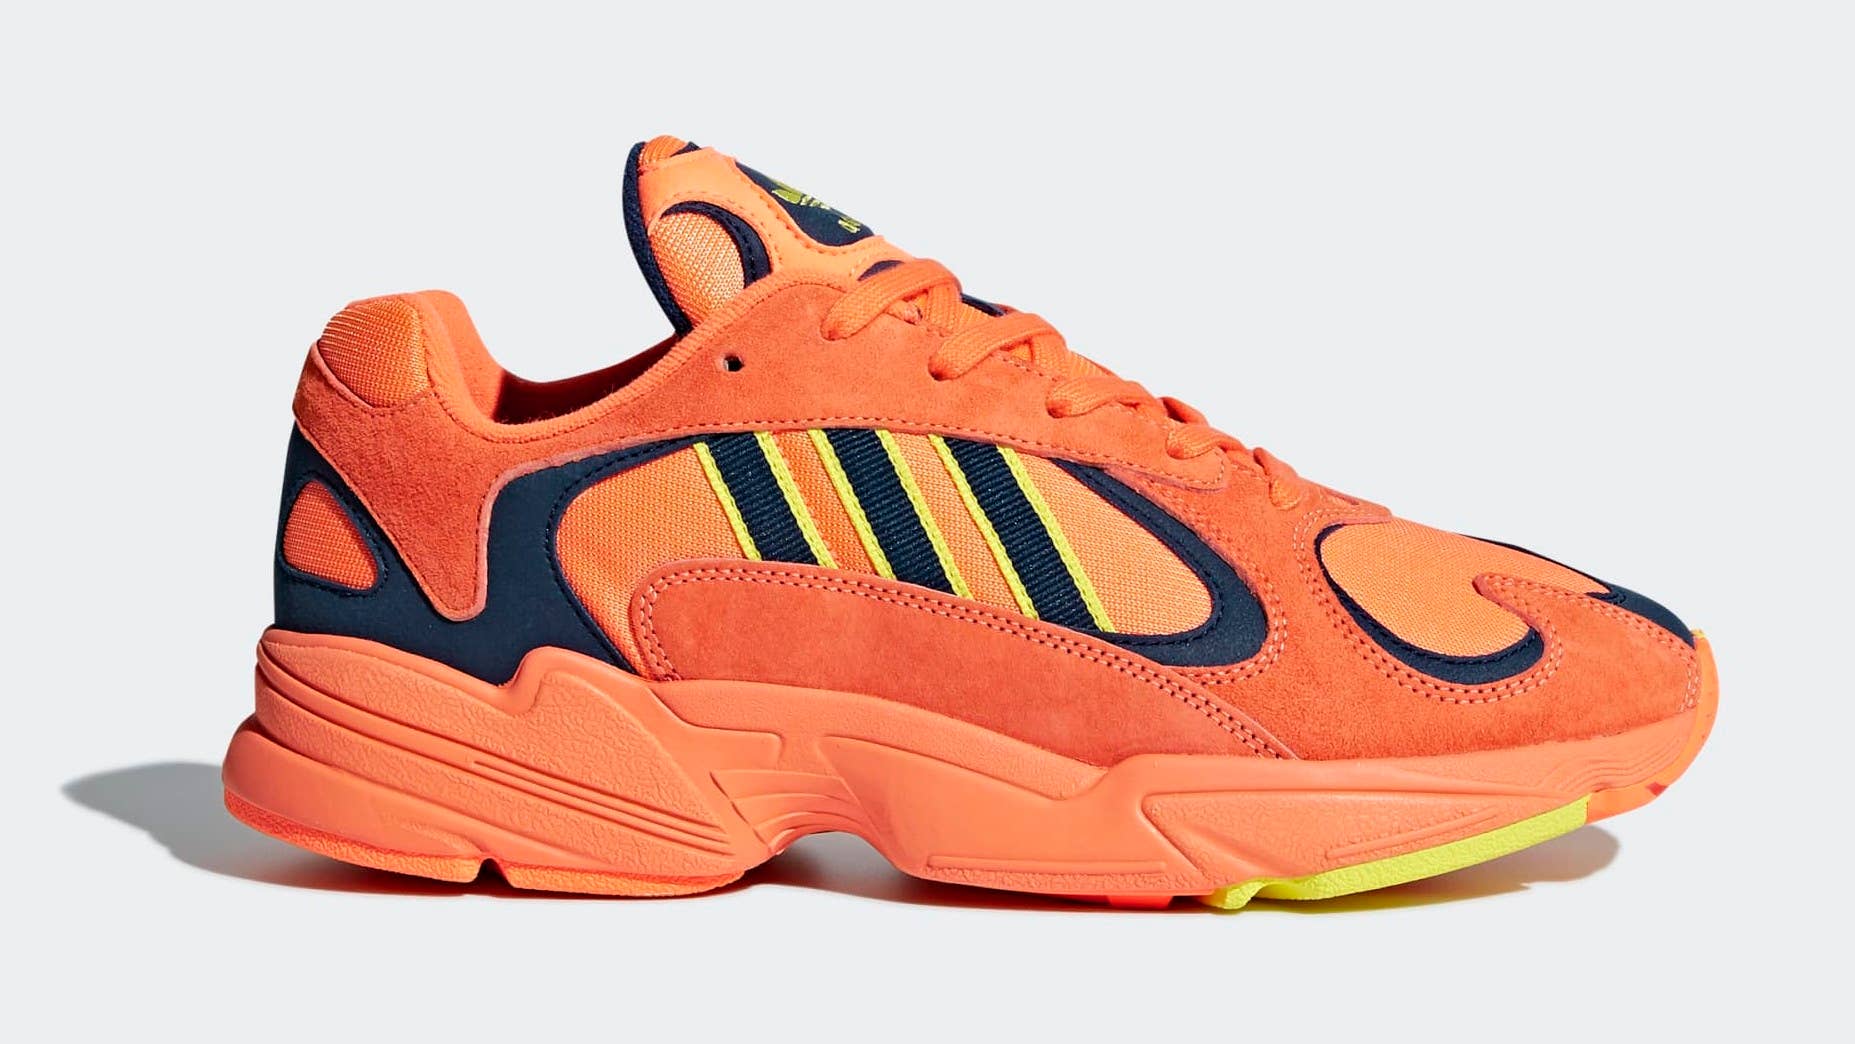 Uitgraving trui Origineel Another Colorway of the Adidas Yung-1 Is Releasing This Week | Complex